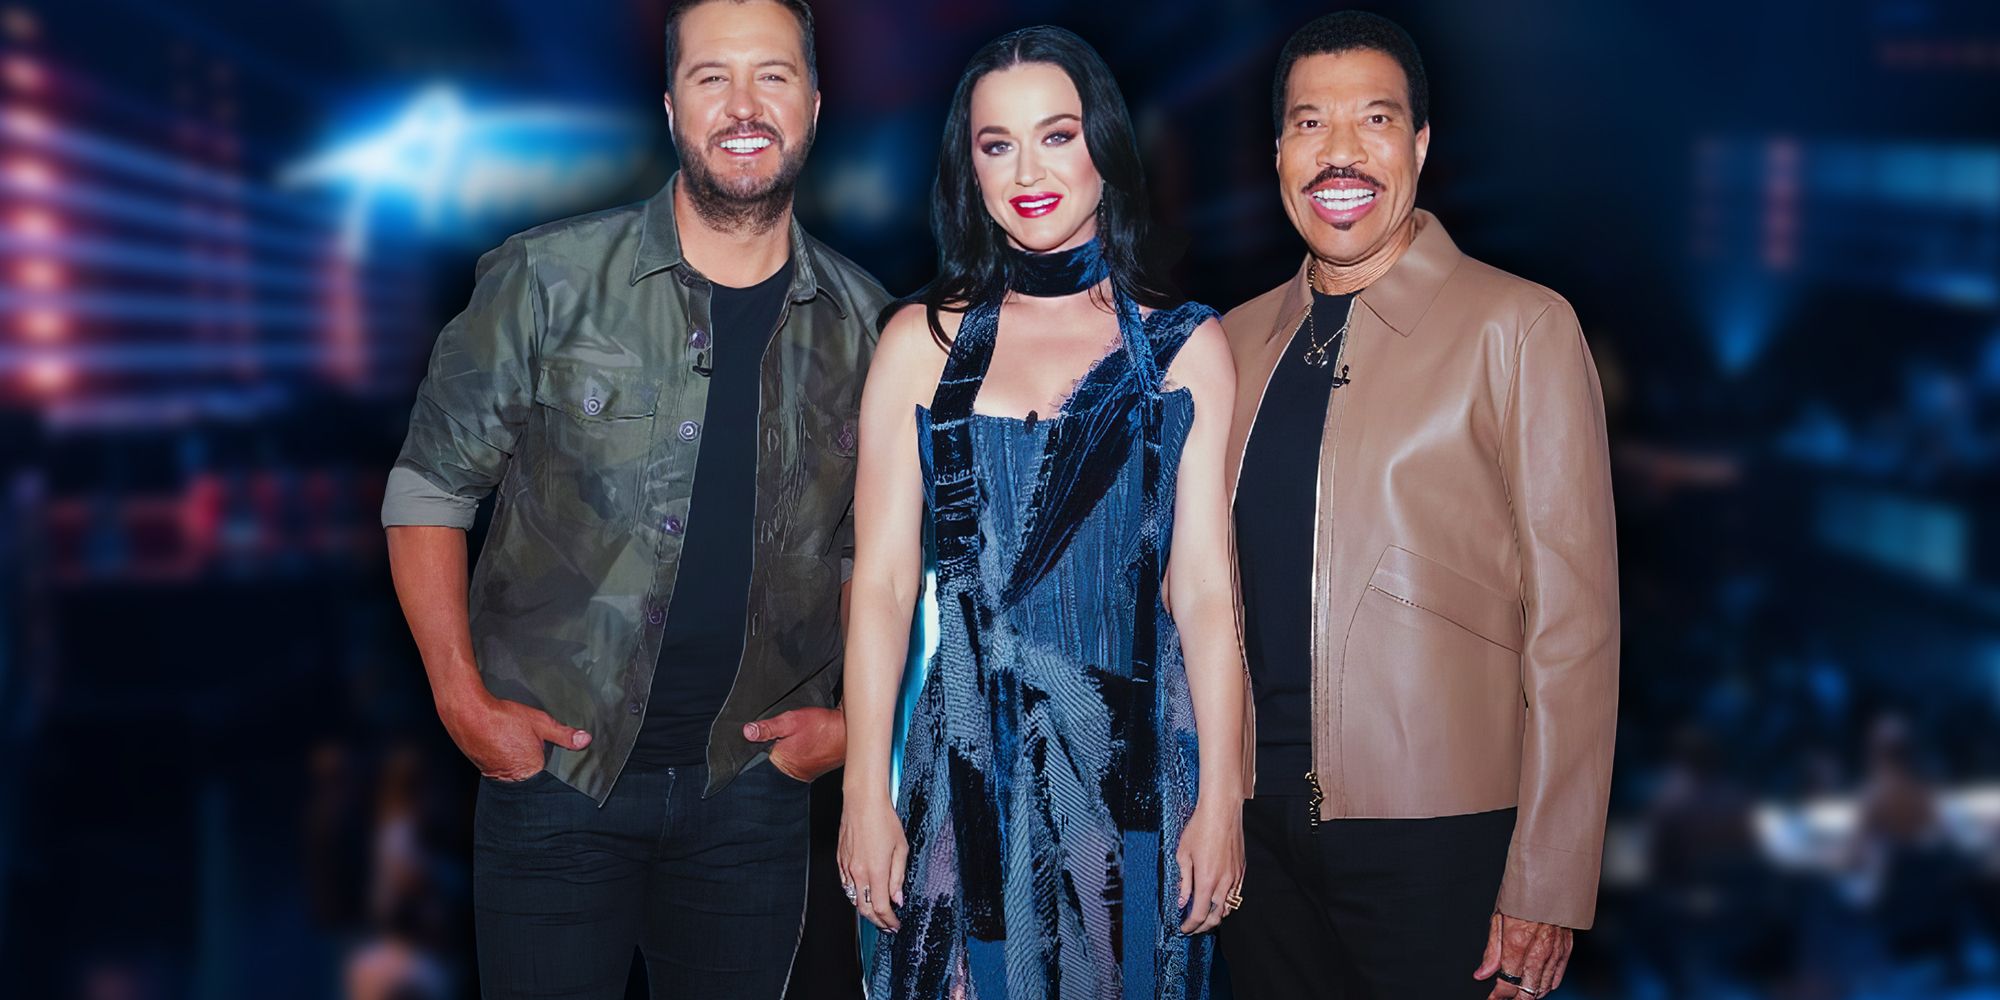 American Idol judges Luke Bryan, Katy Perry and Lionel Richie smiling